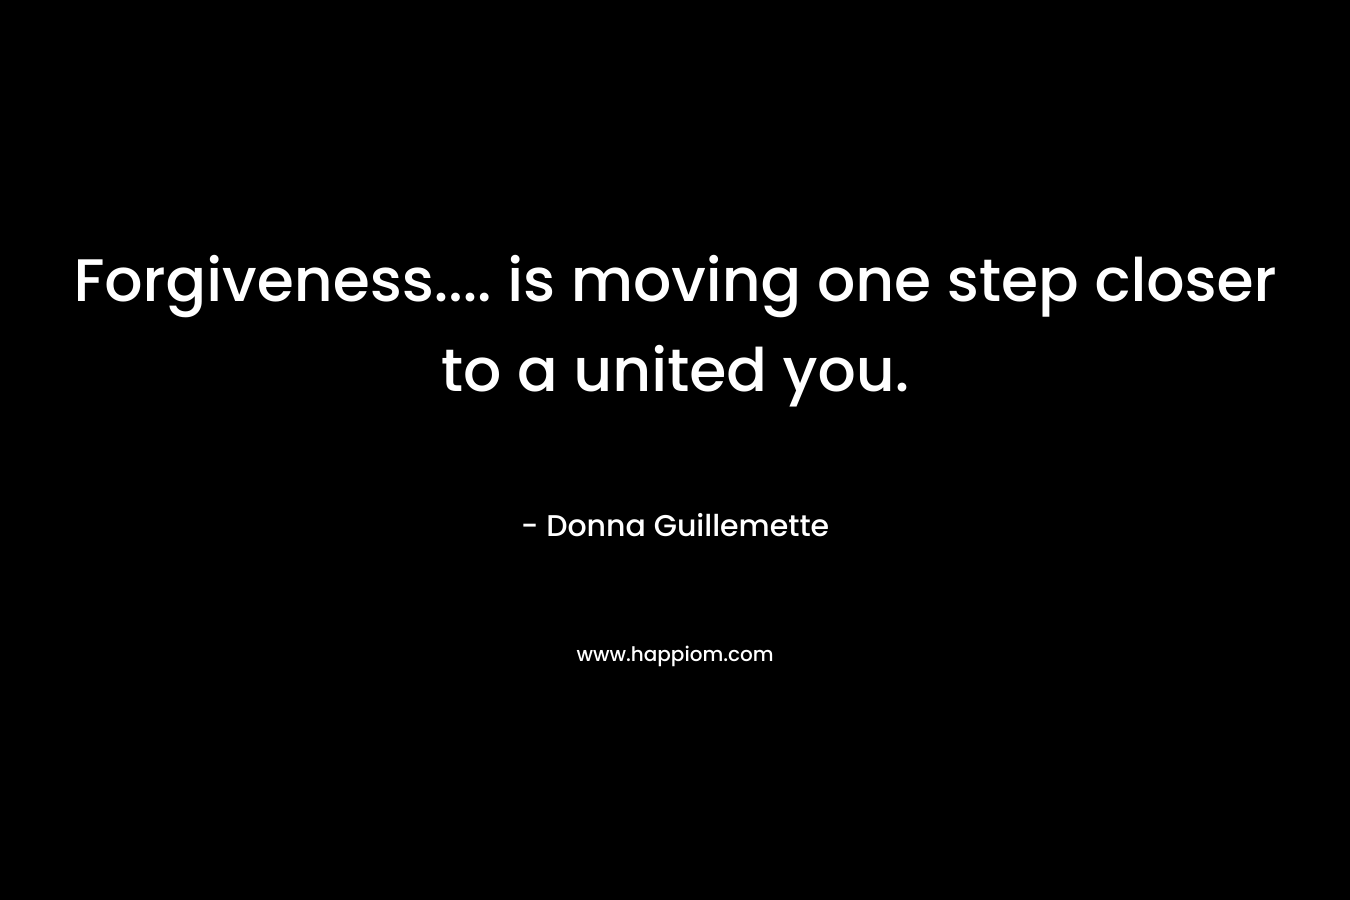 Forgiveness.... is moving one step closer to a united you.